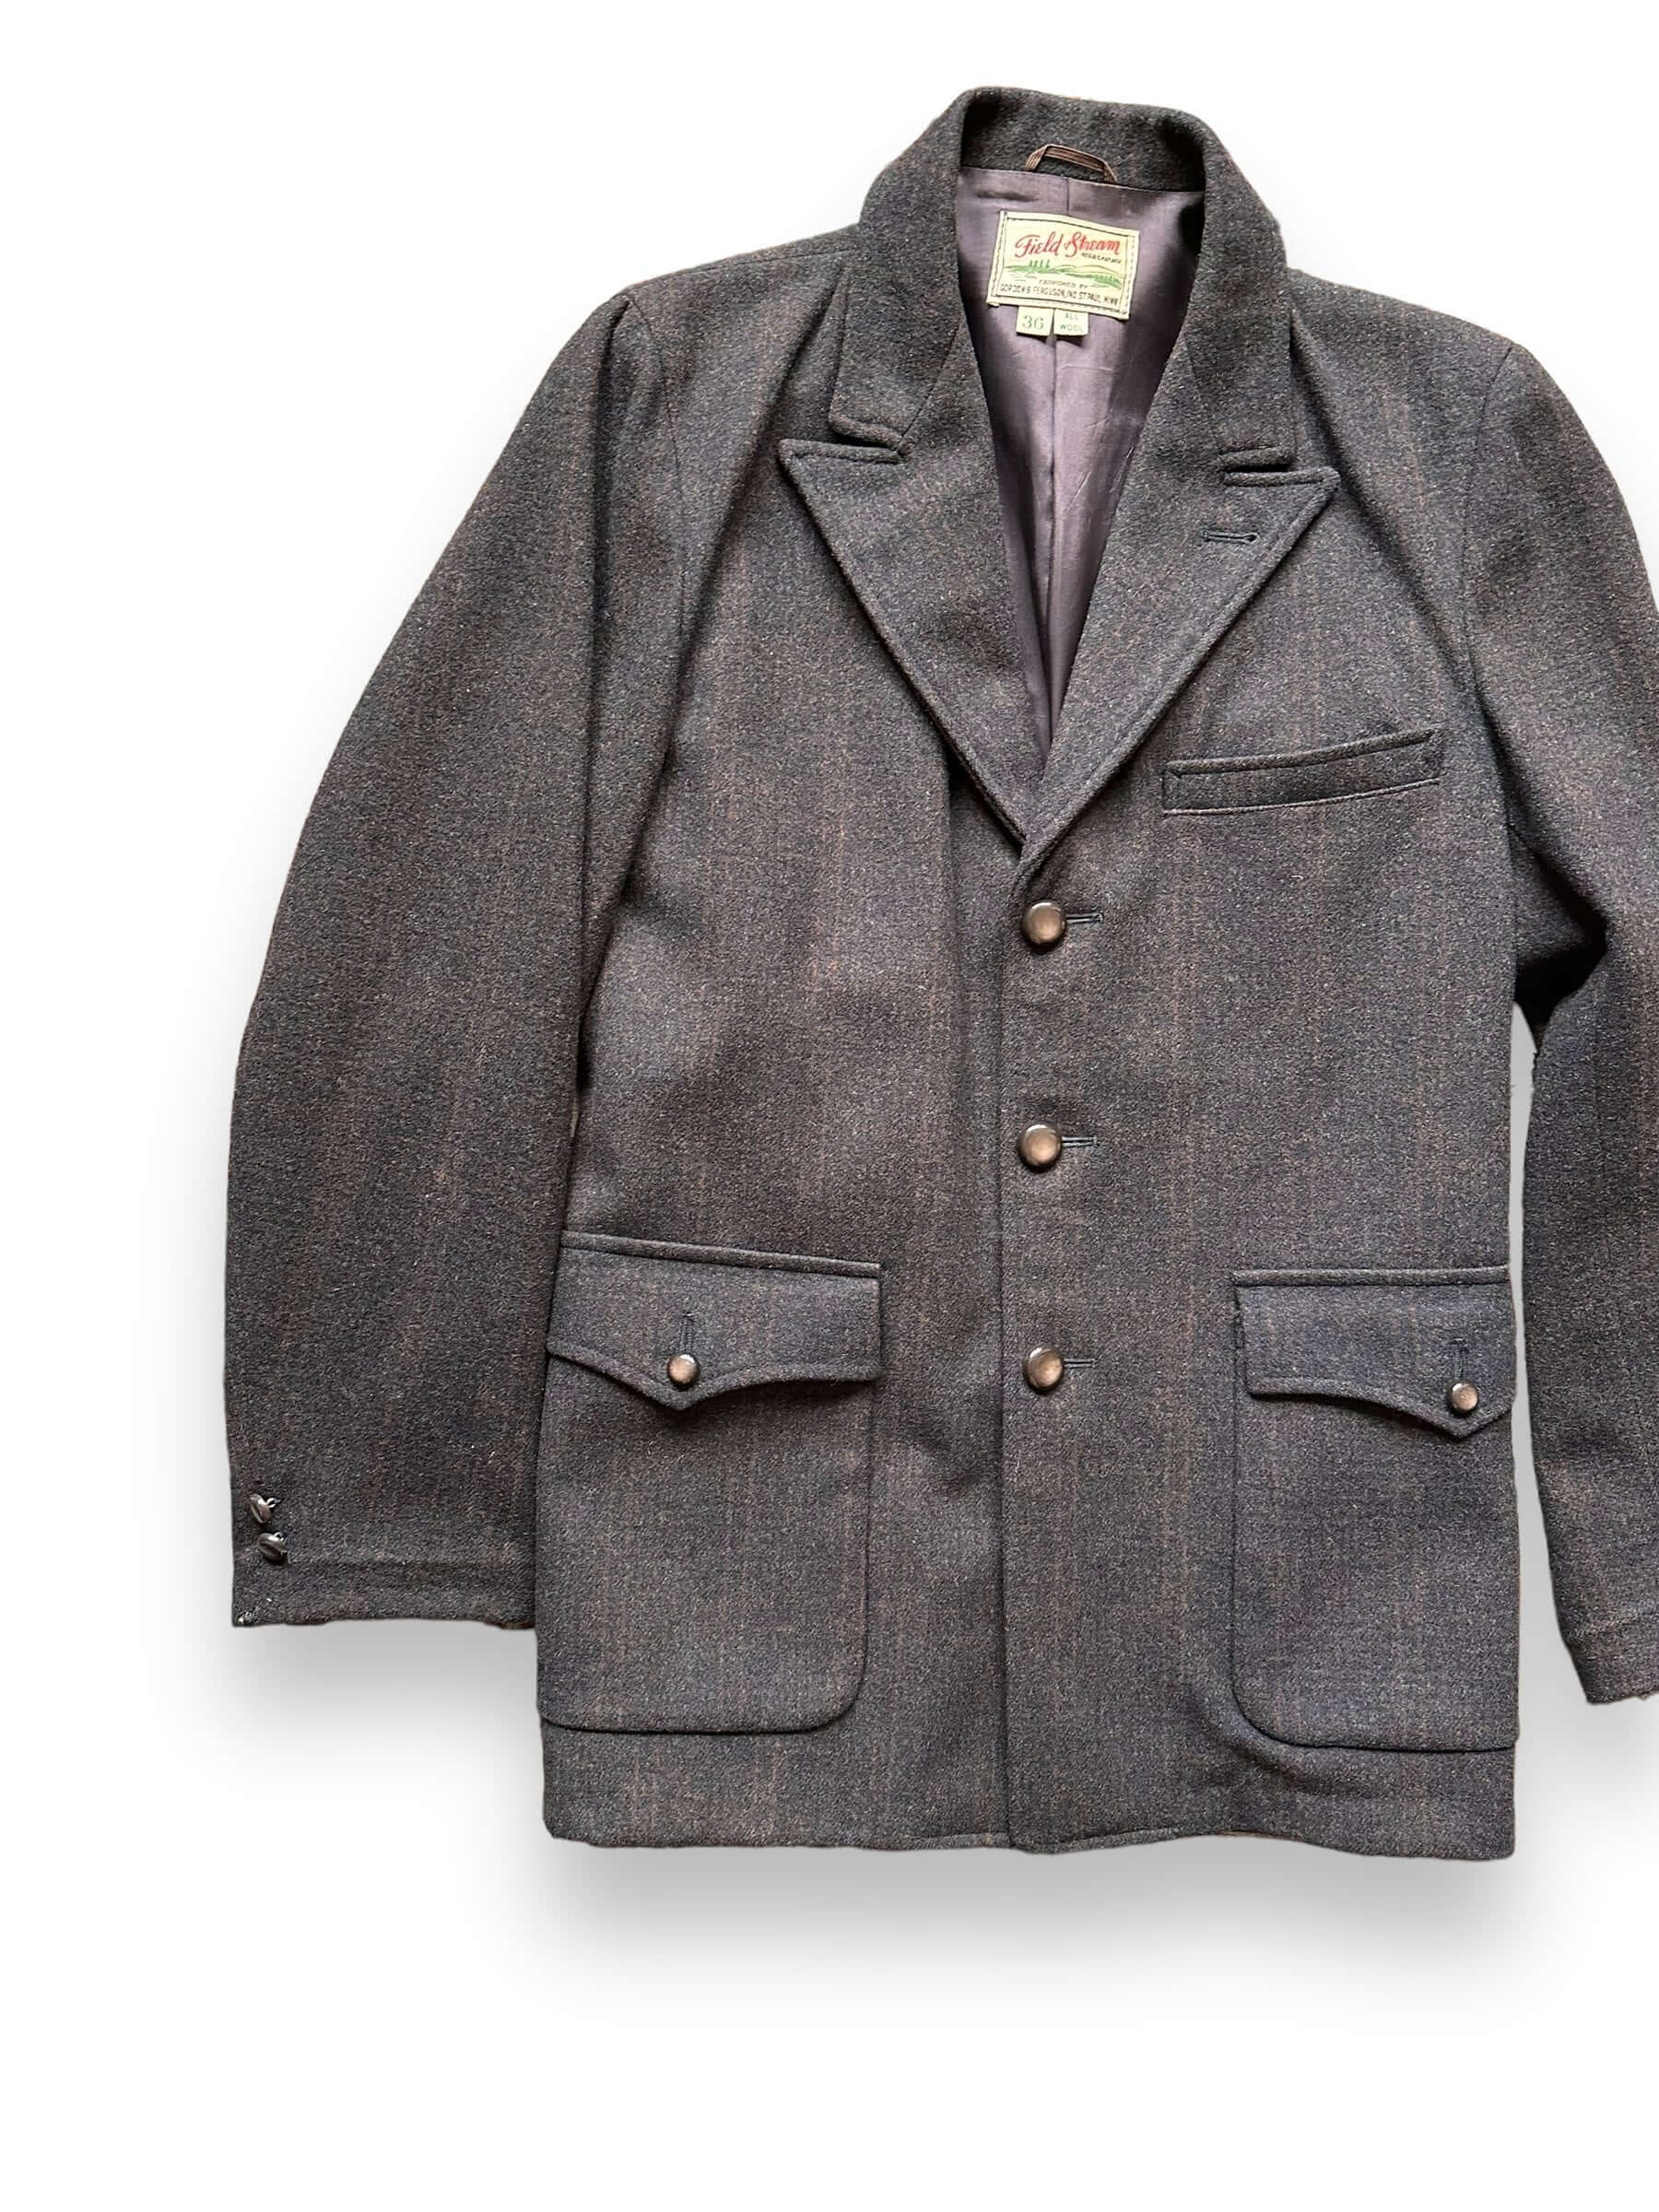 Front Right View of Vintage Field & Stream Wool Jacket SZ 36 | Vintage Wool Jacket Seattle  | Seattle Vintage Clothing